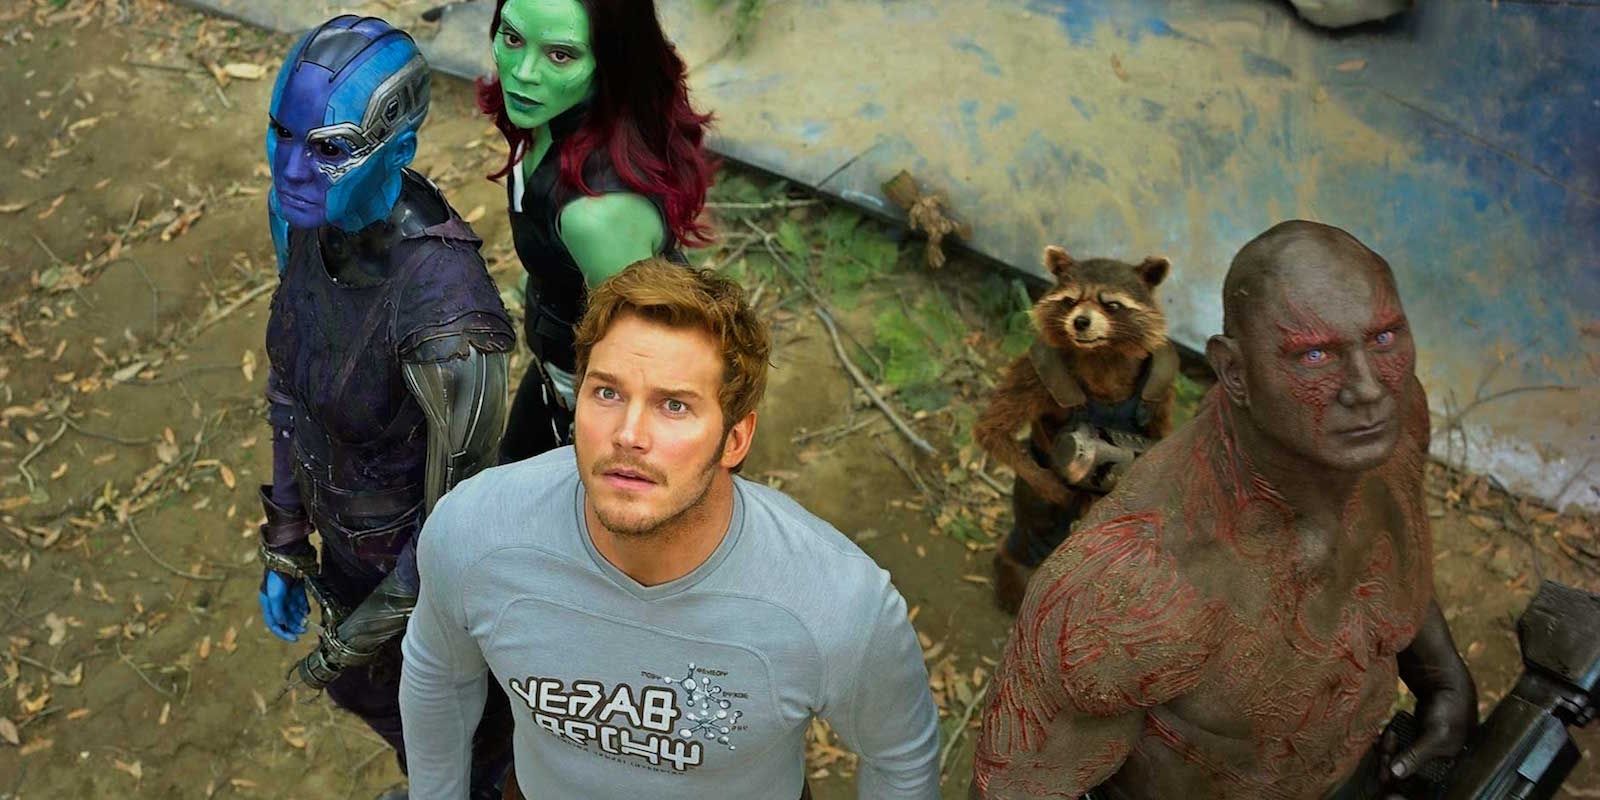 Should Guardians of the Galaxy 2 Have Had More MCU Connections?